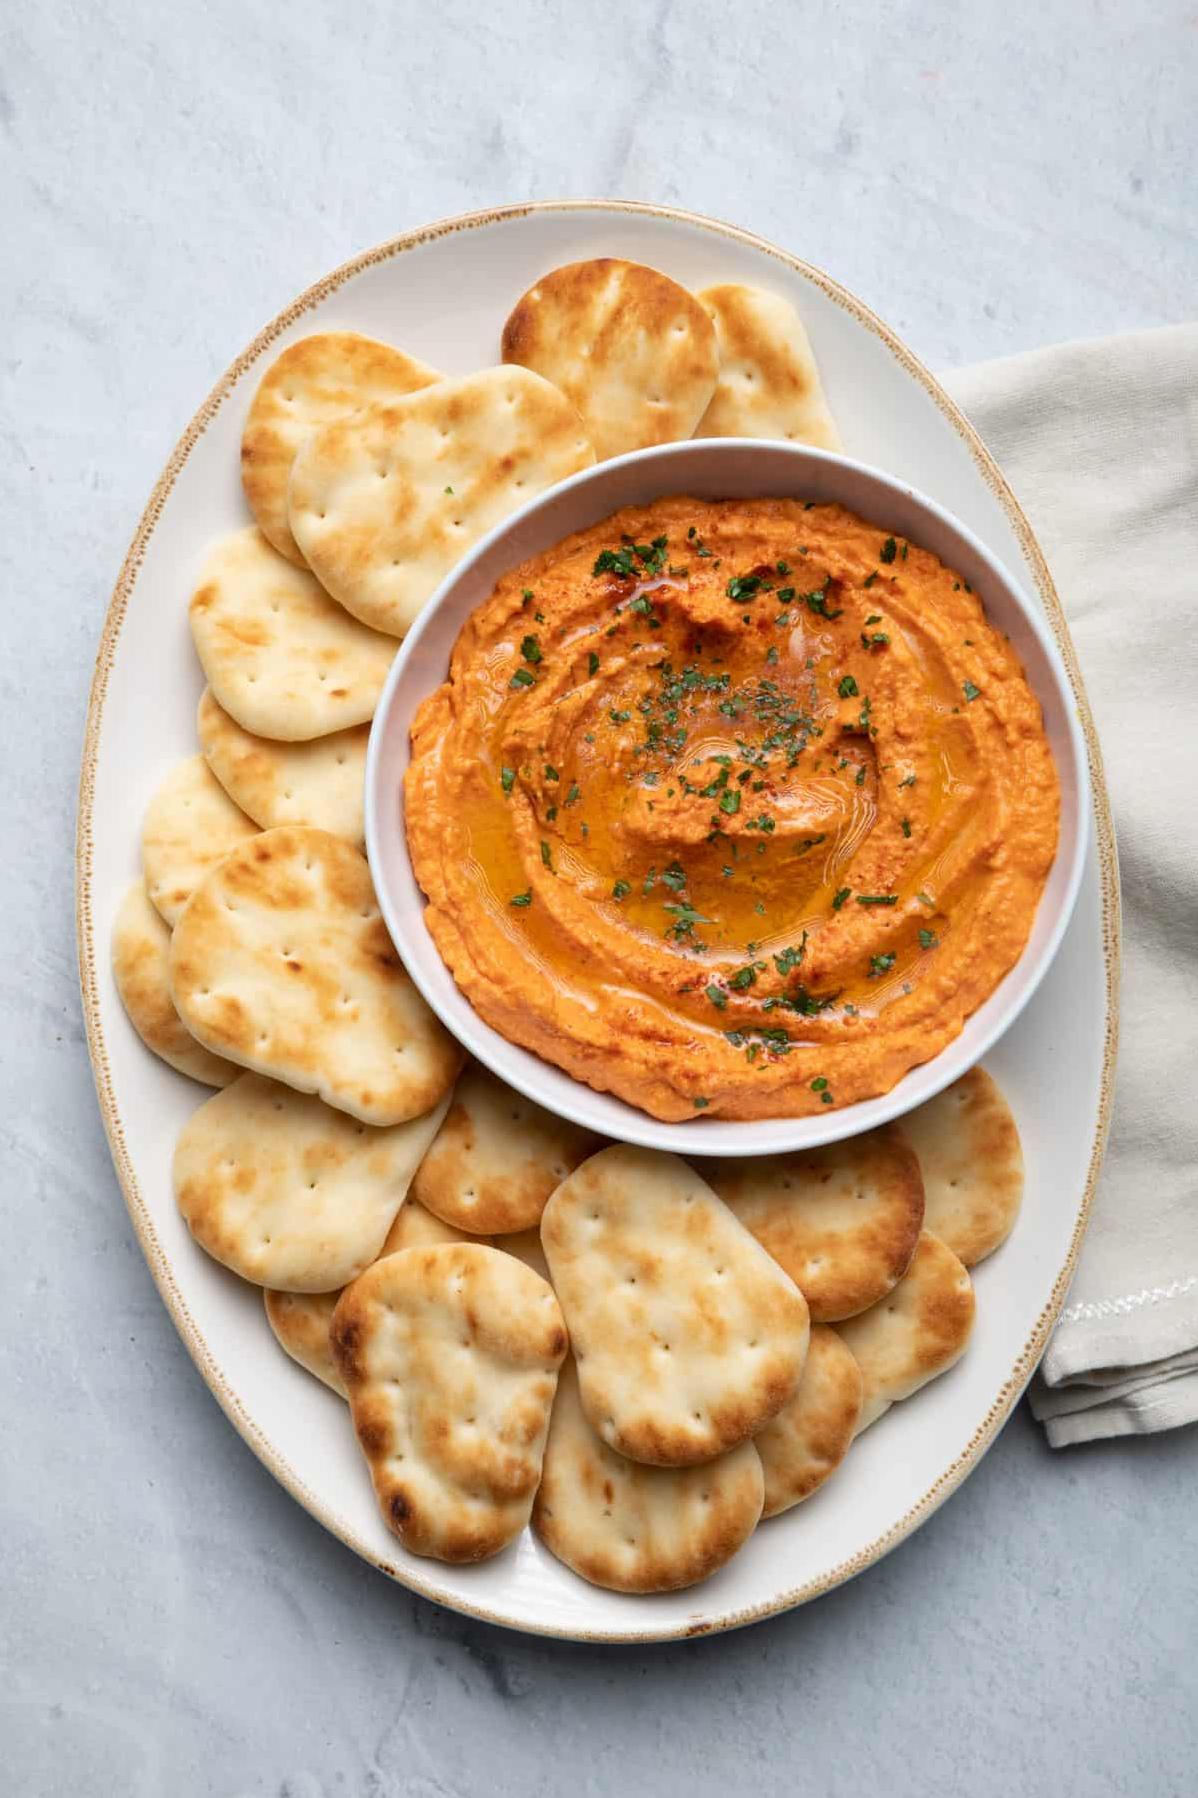  A Perfect Summer Dip with Lively Flavors